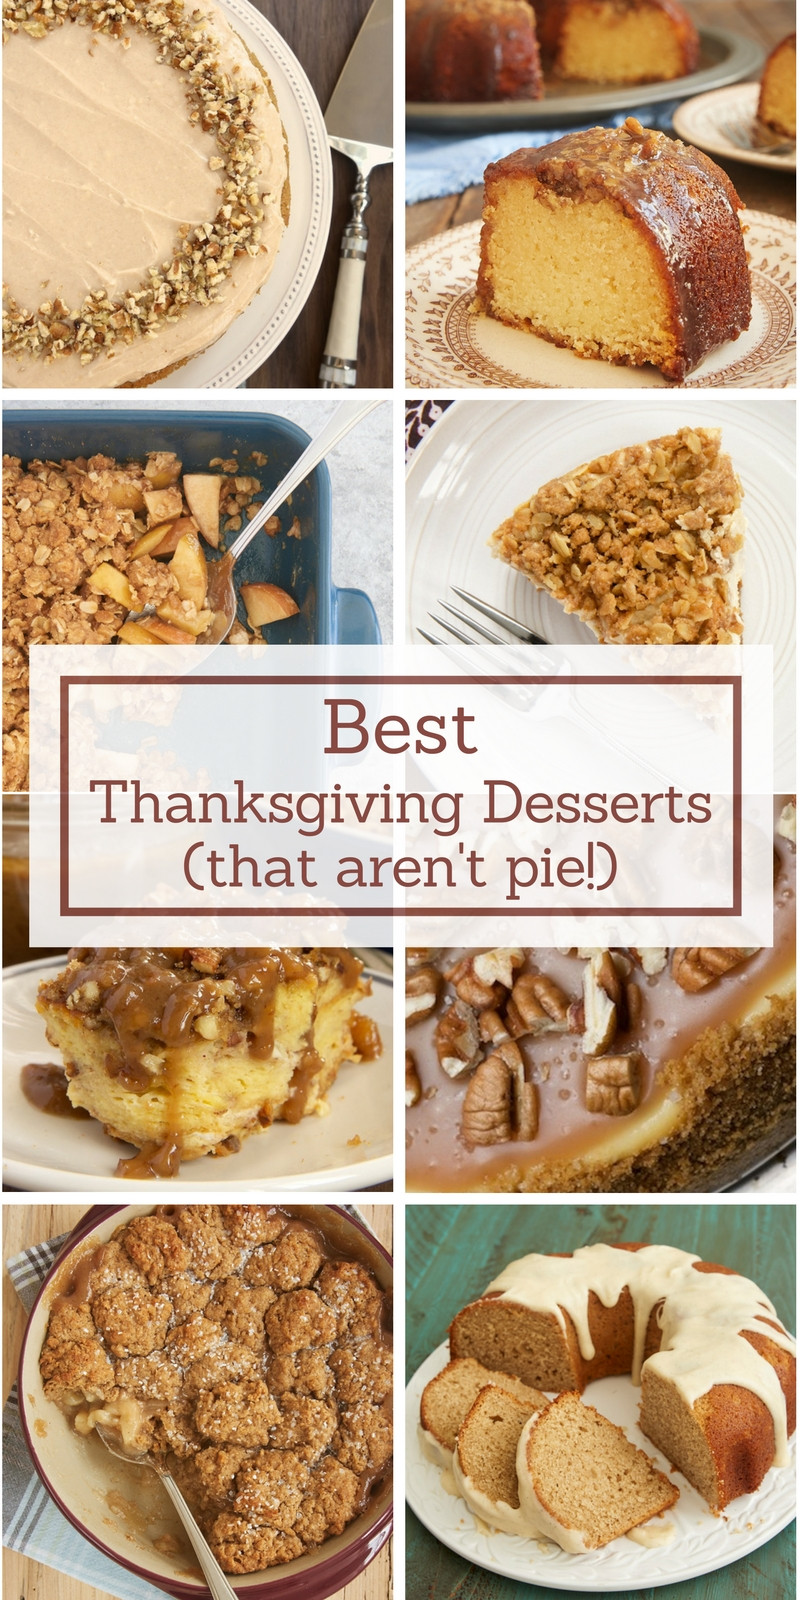 Thanksgiving Pies And Cakes
 Best Thanksgiving Desserts Bake or Break